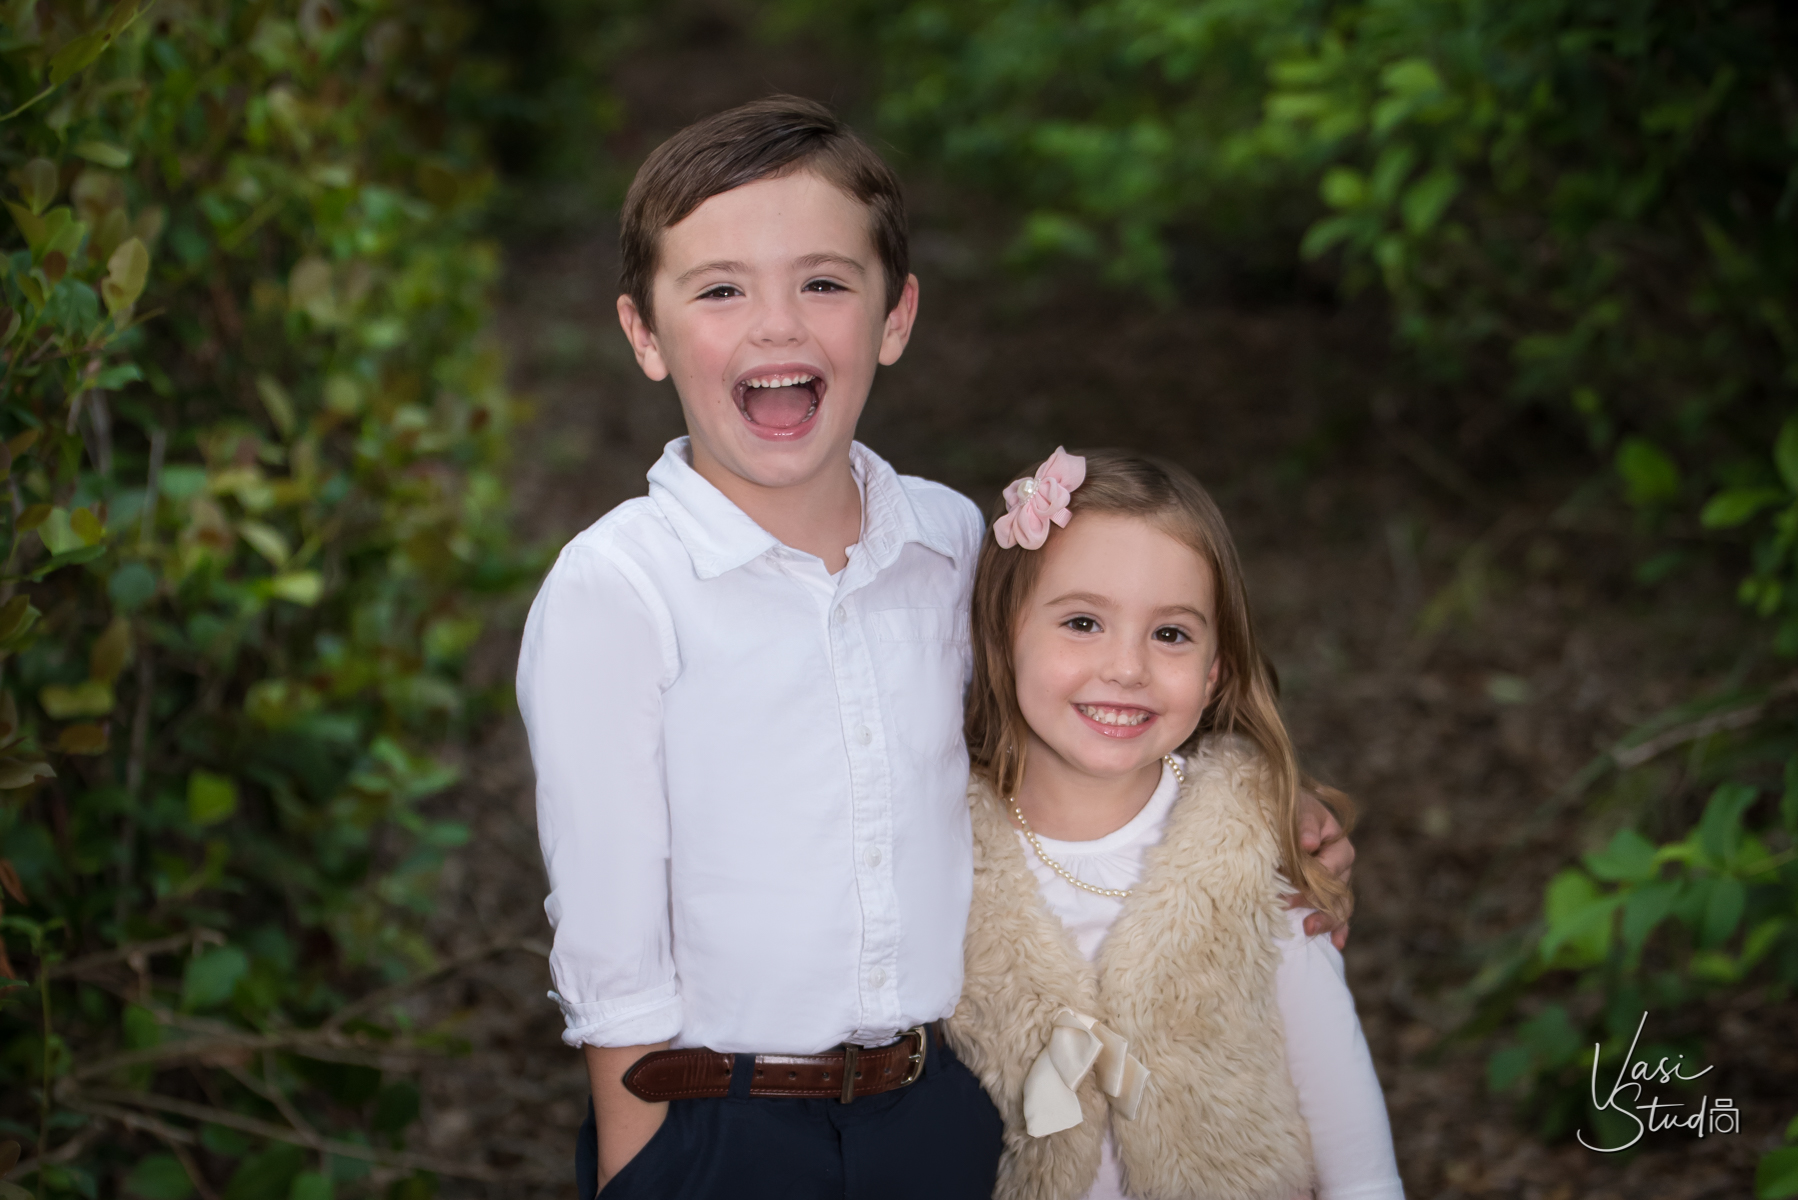 Sibling pictures available in all package sets from Vasi Siedman.